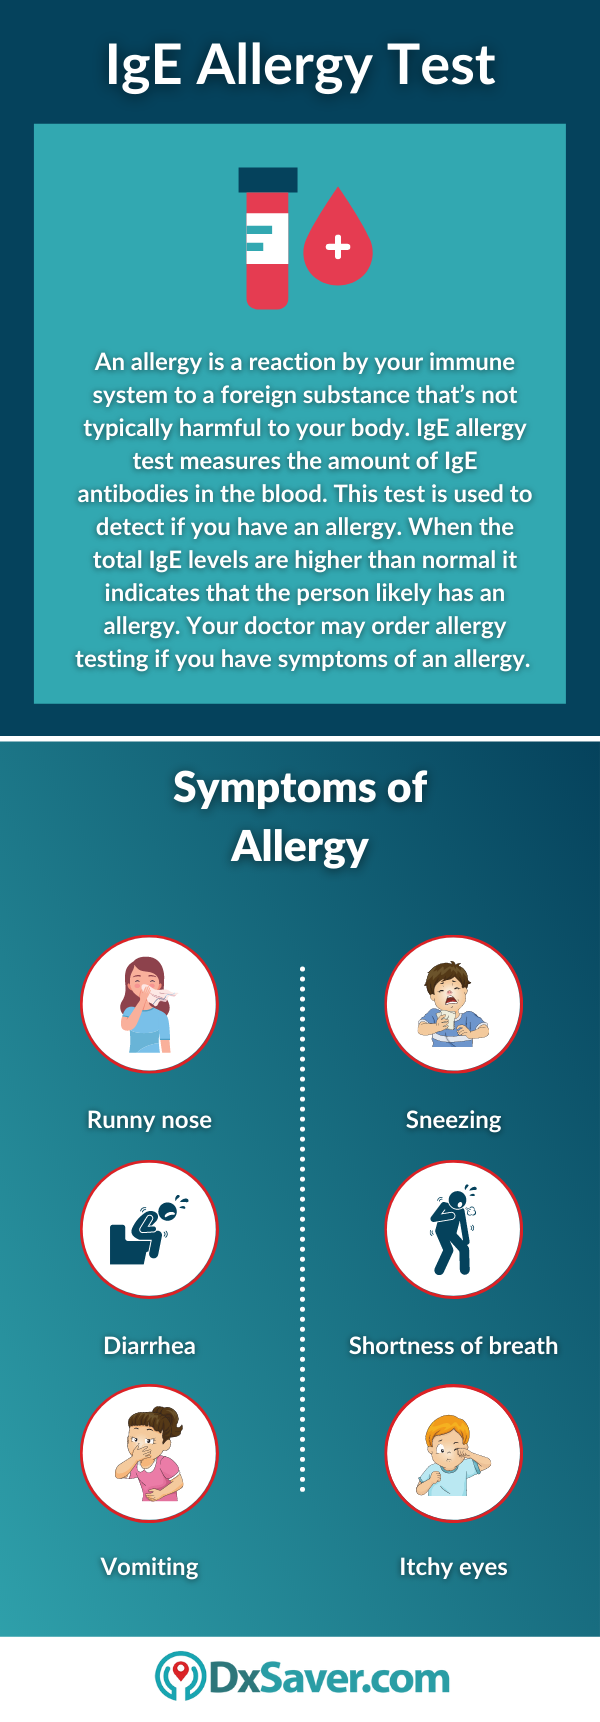 IgE Allergy Test and Symptoms of Allergy